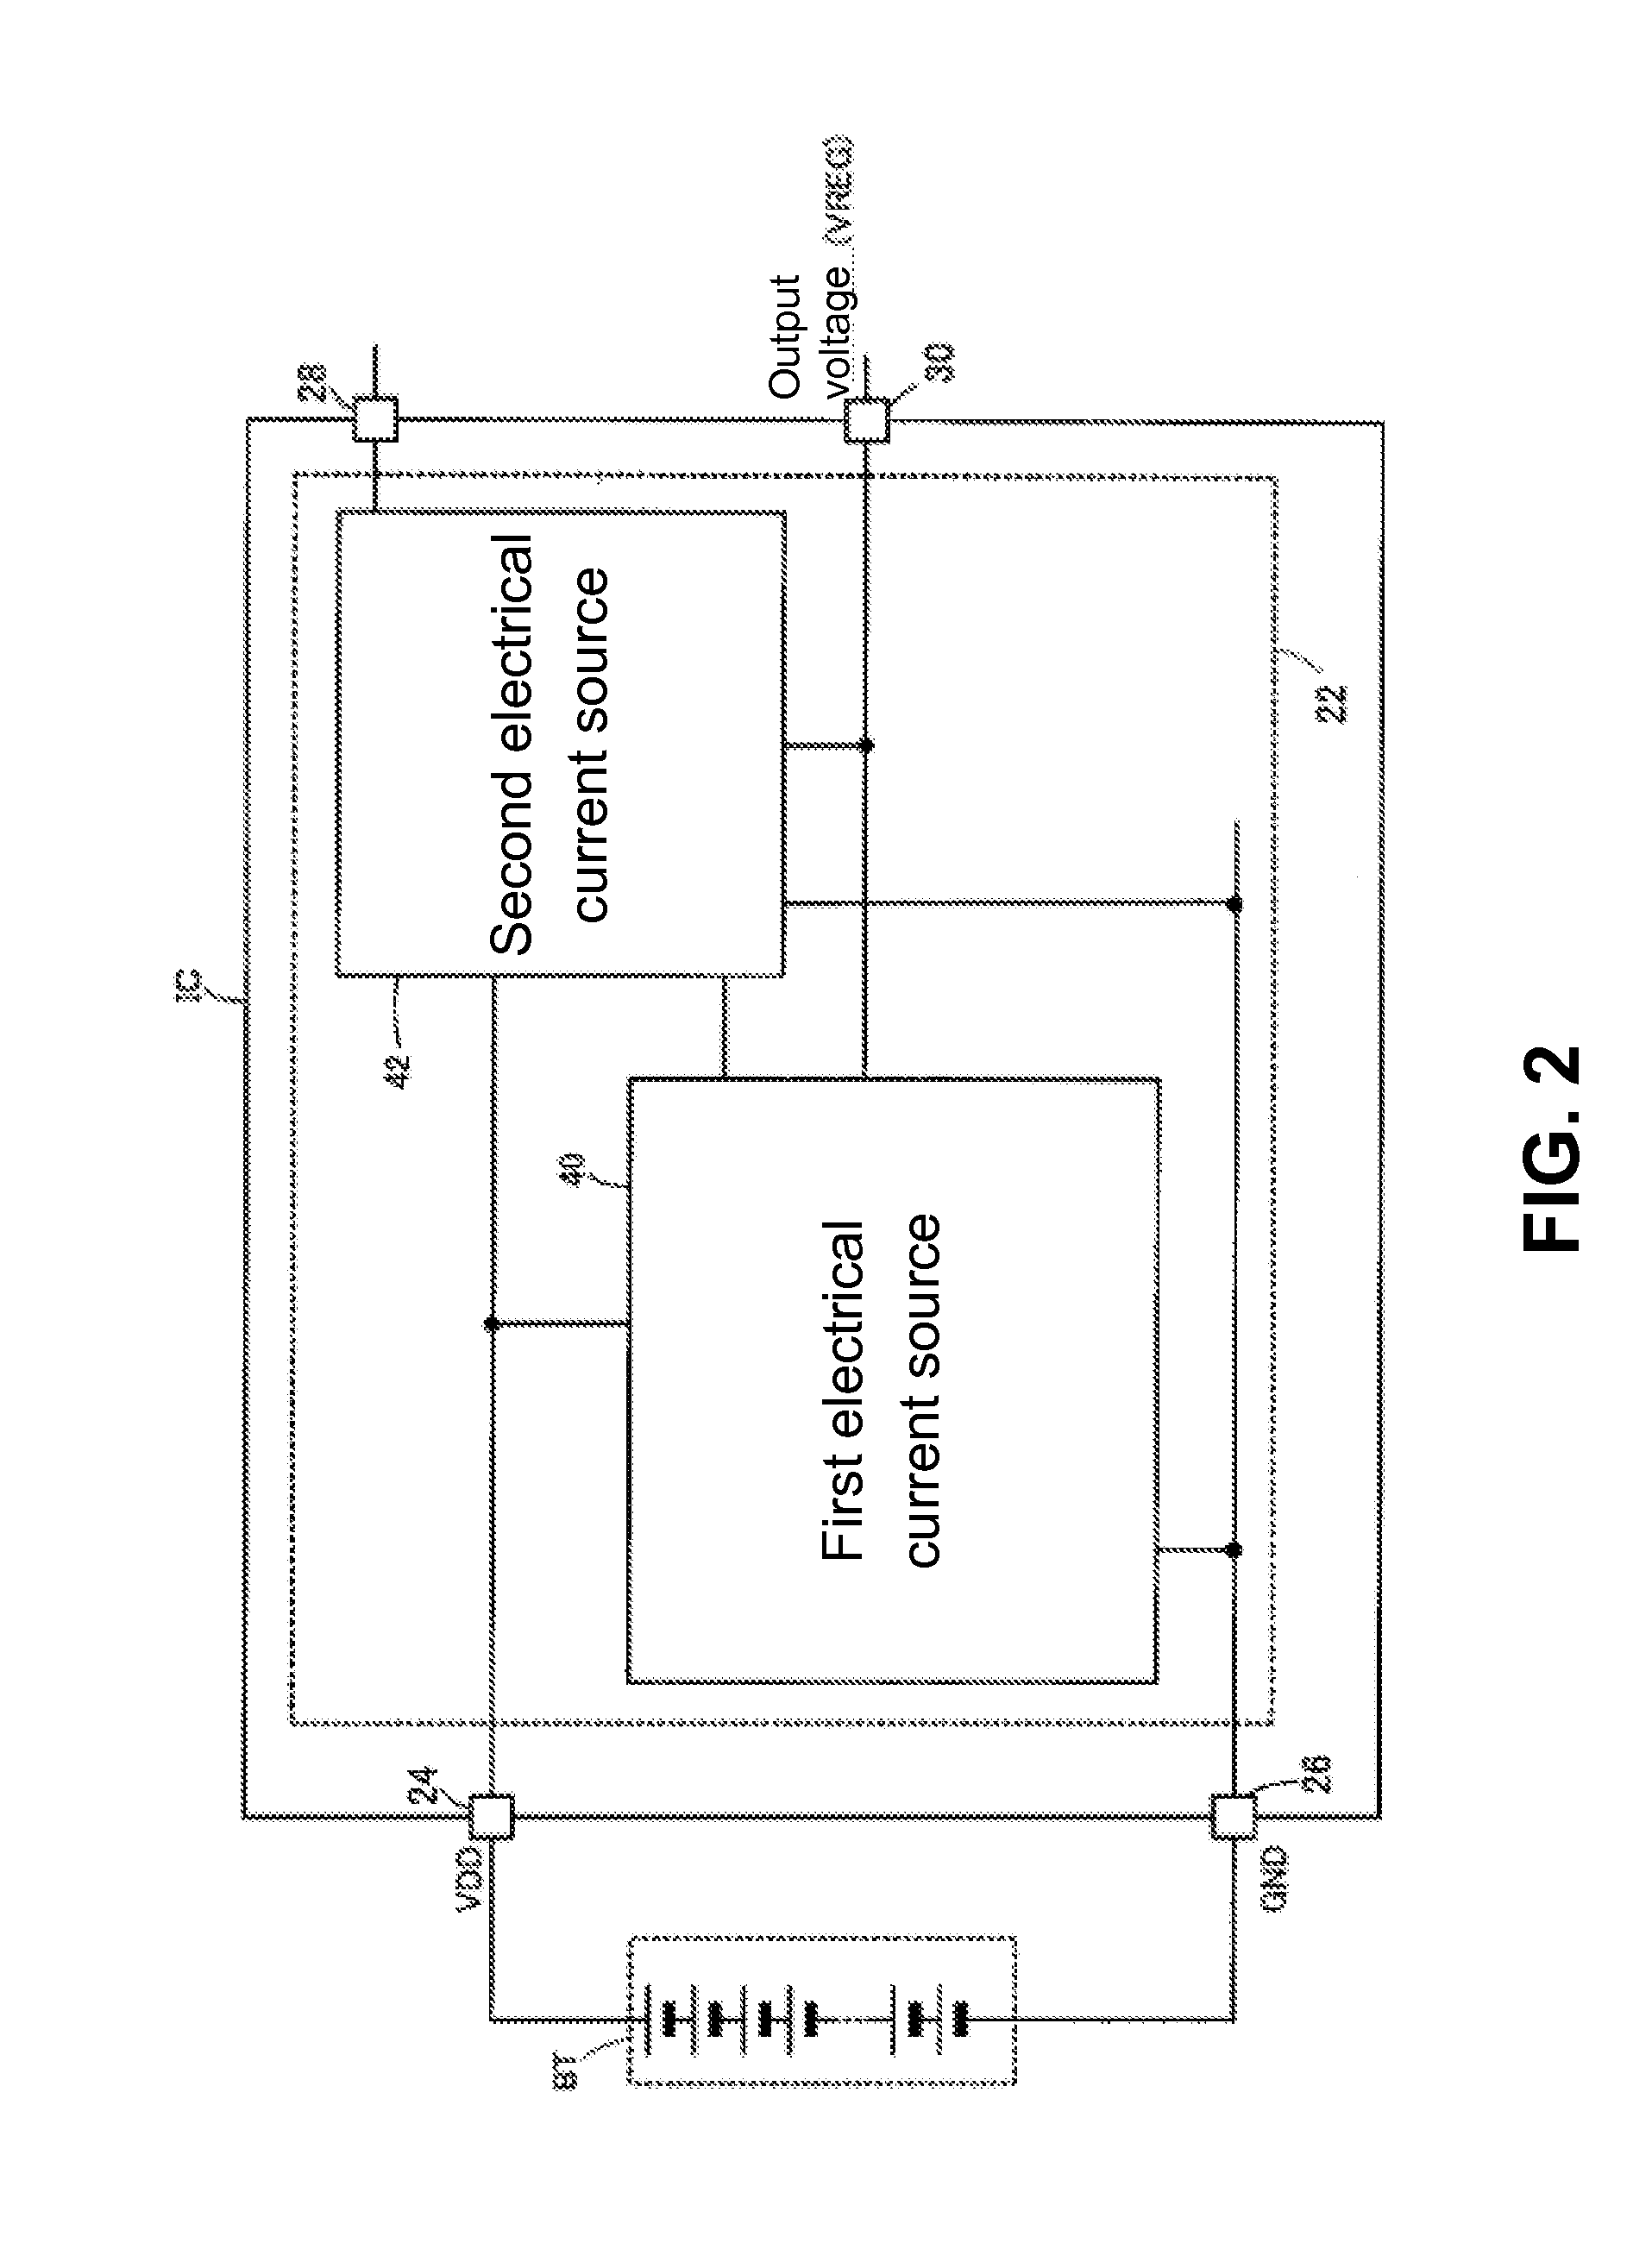 Semiconductor device and battery monitoring system